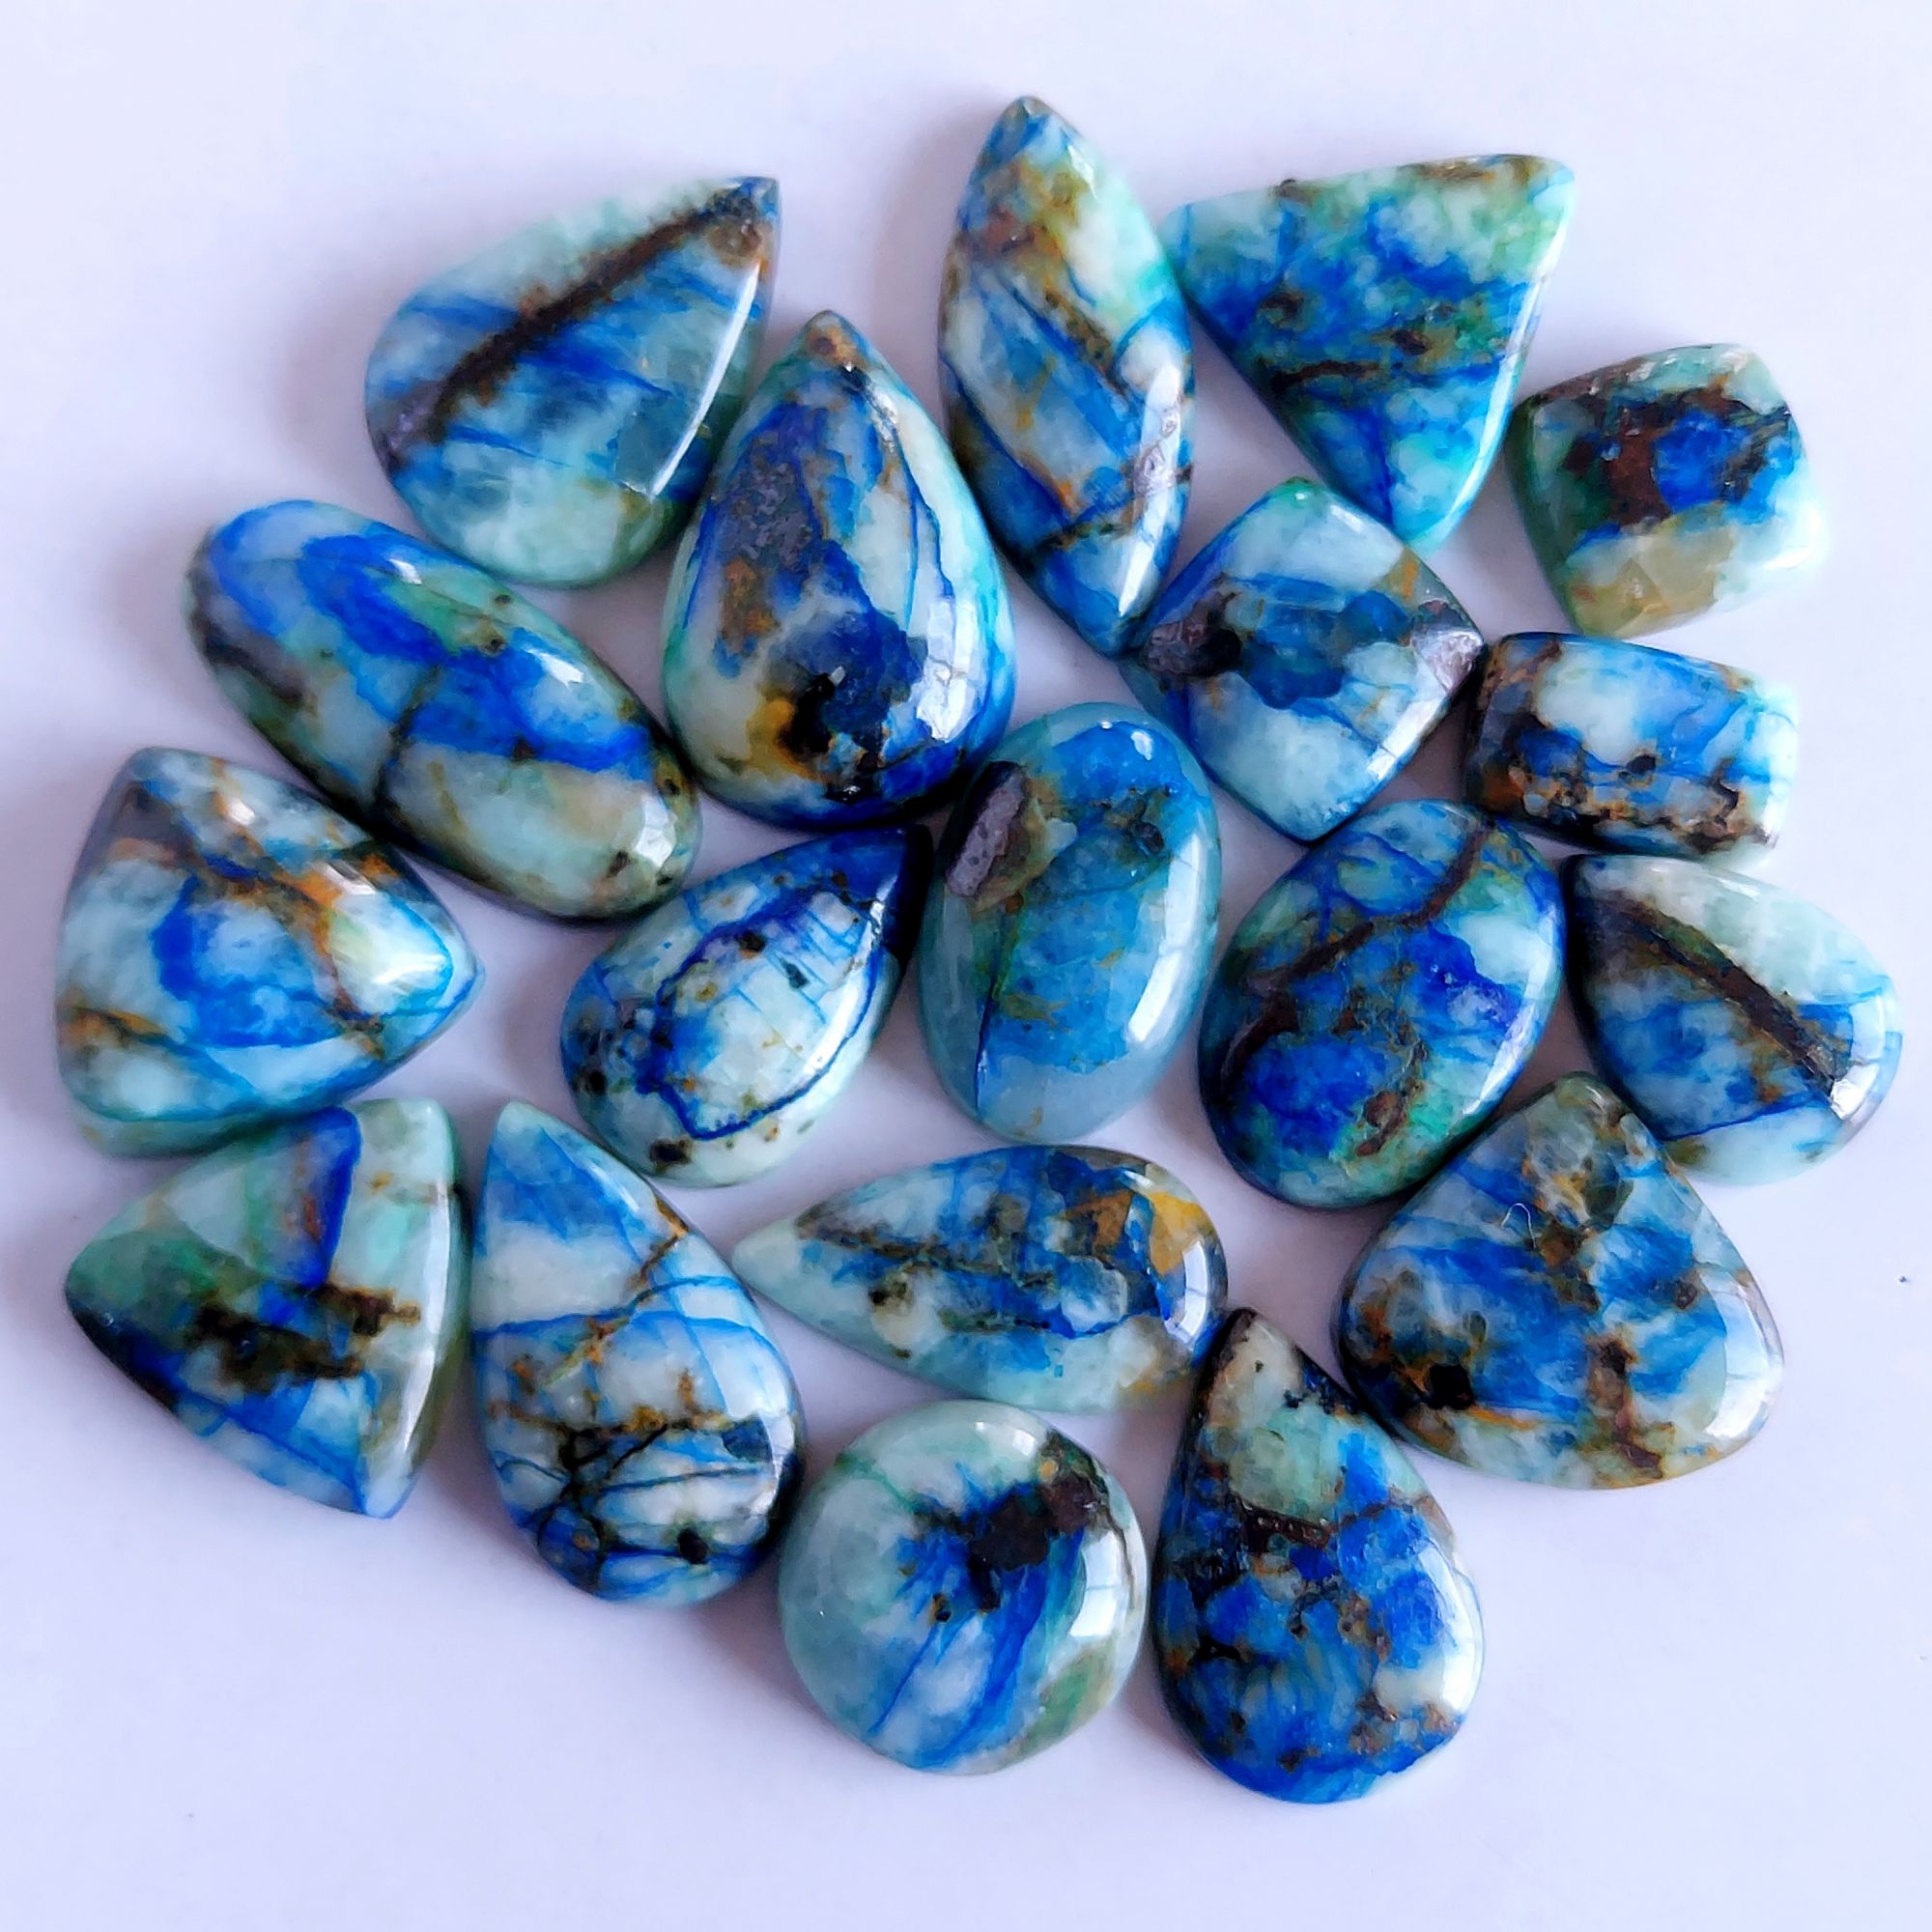 256.Cts 19 Pcs Natural Smooth Azurite Mix Loose Gemstone Cabochon Lot Size 26x12 14x14mm Wholesale Gemstone For jewelry